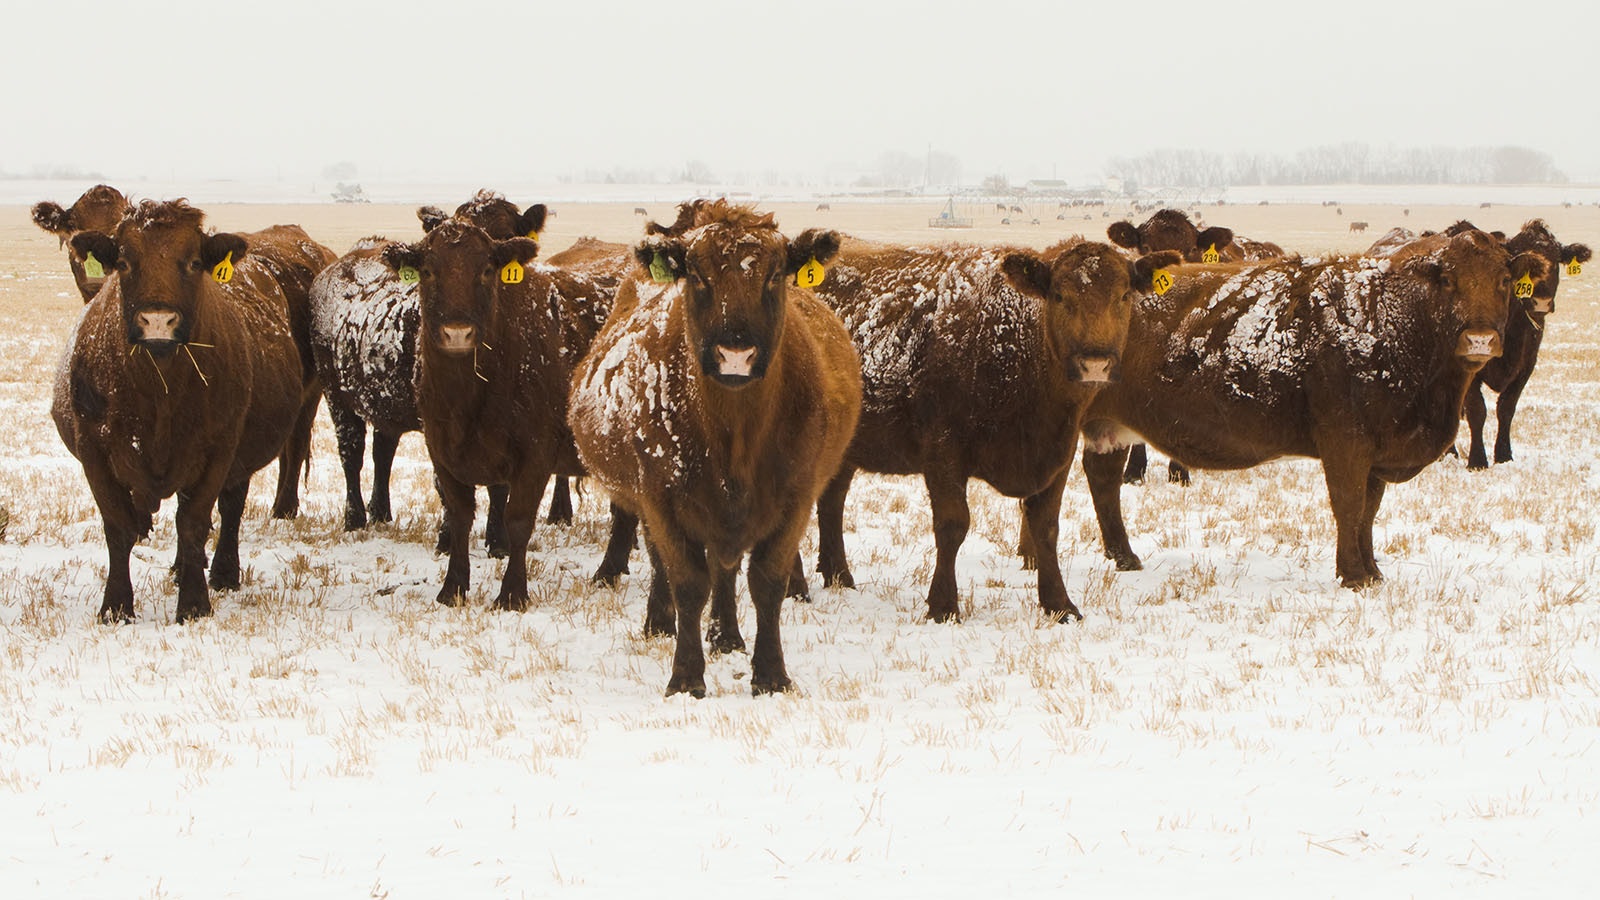 Cows in snow 1 10 23